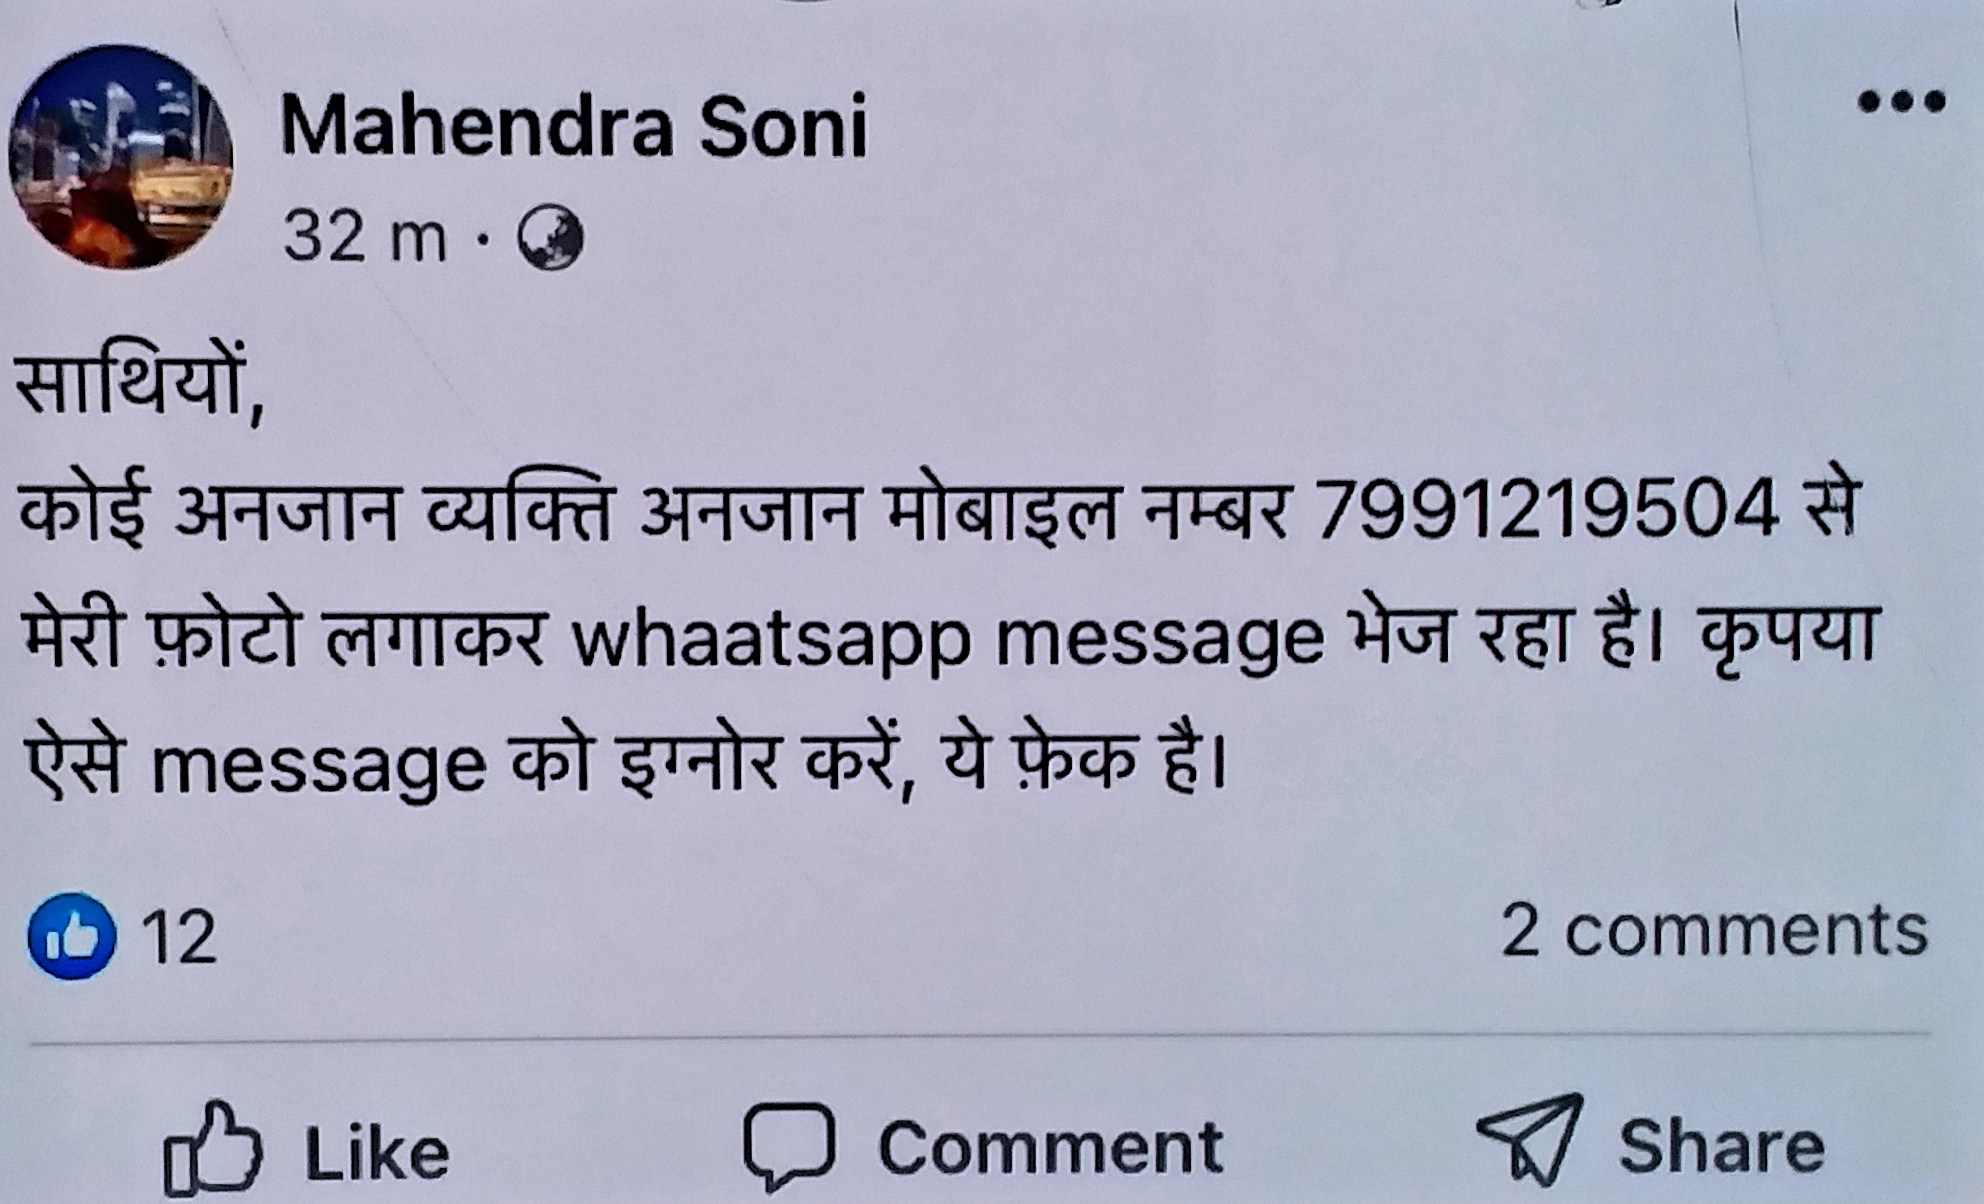 Fraud in the name of Nigam commissioner using his photo as Whatsapp DP